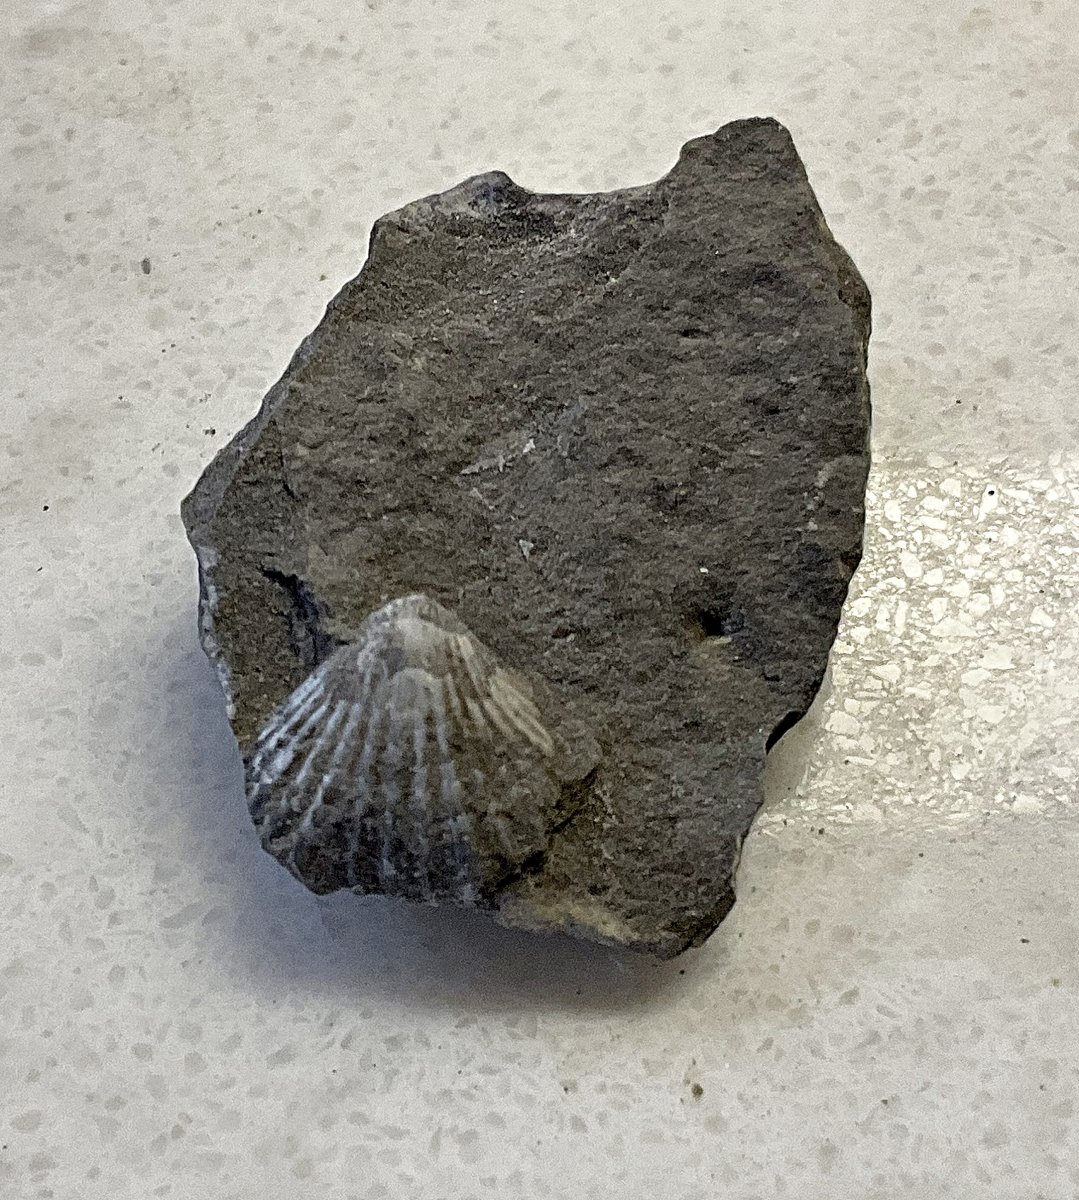 Rhynchonellid Brachiopod from the Rochester Shale